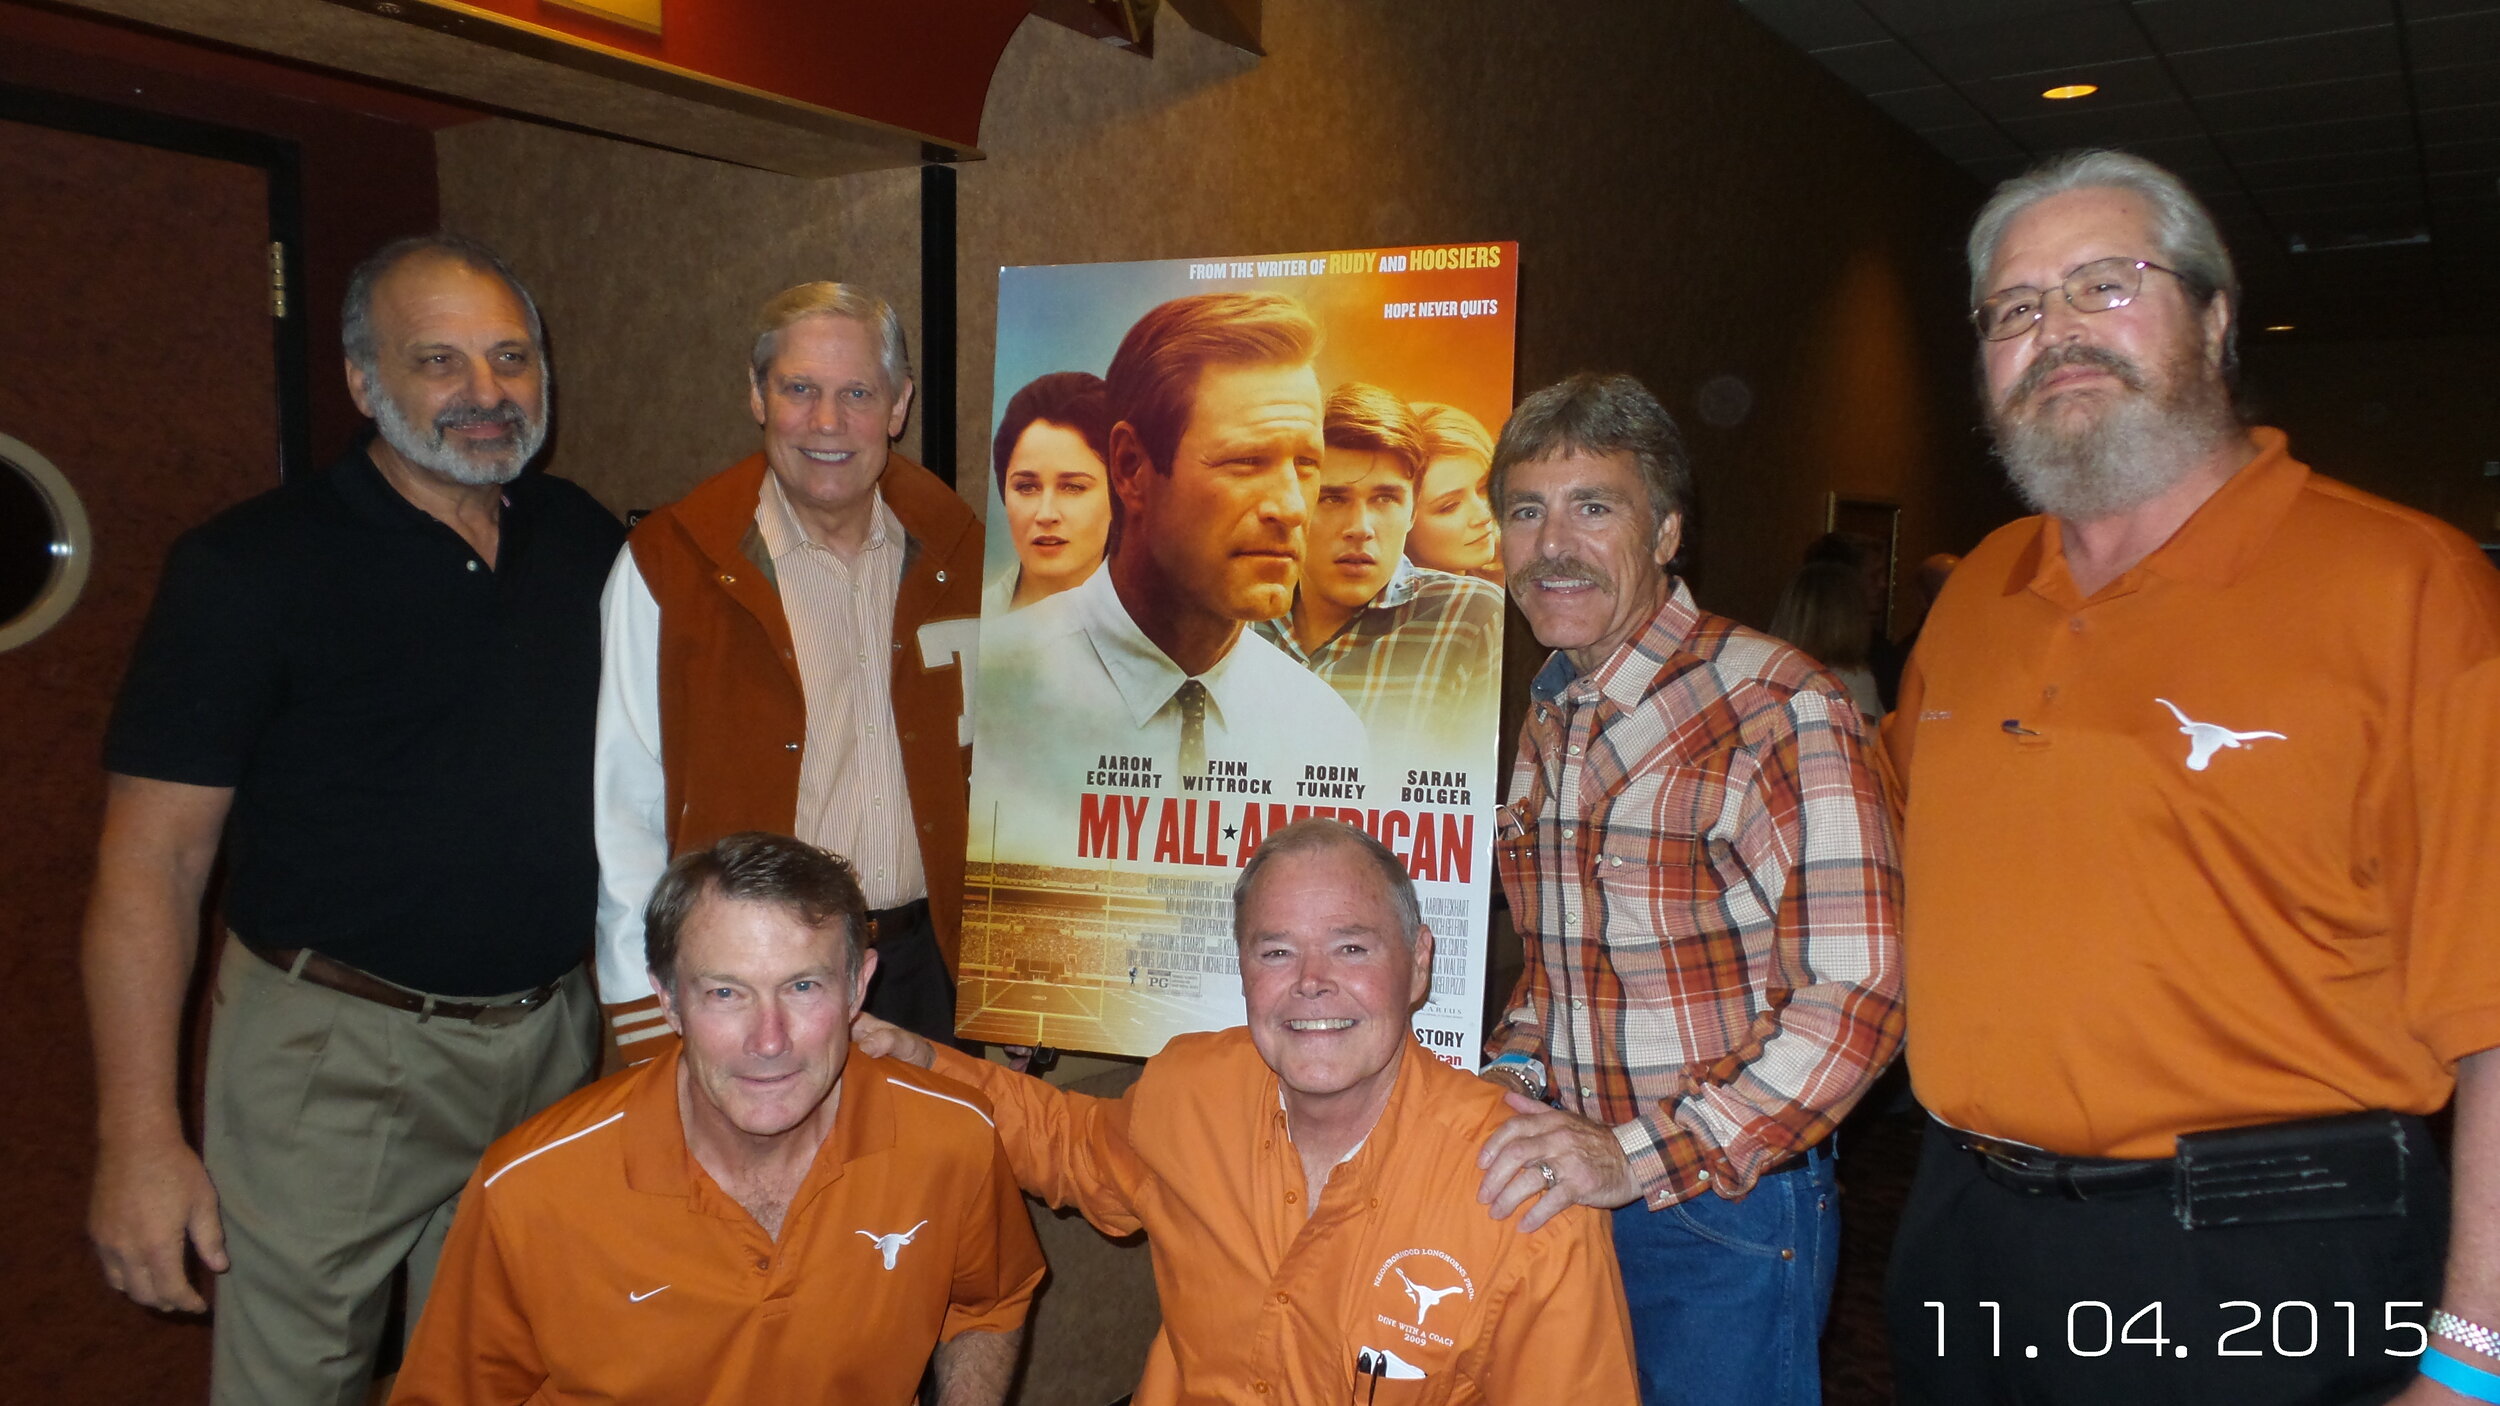 Grand opening of My All American Movie -Bill Attesis, Corby Robertson, Don Burrisk, Bobby Wuensch, kneeling Mike Campbell and Billy Dale 